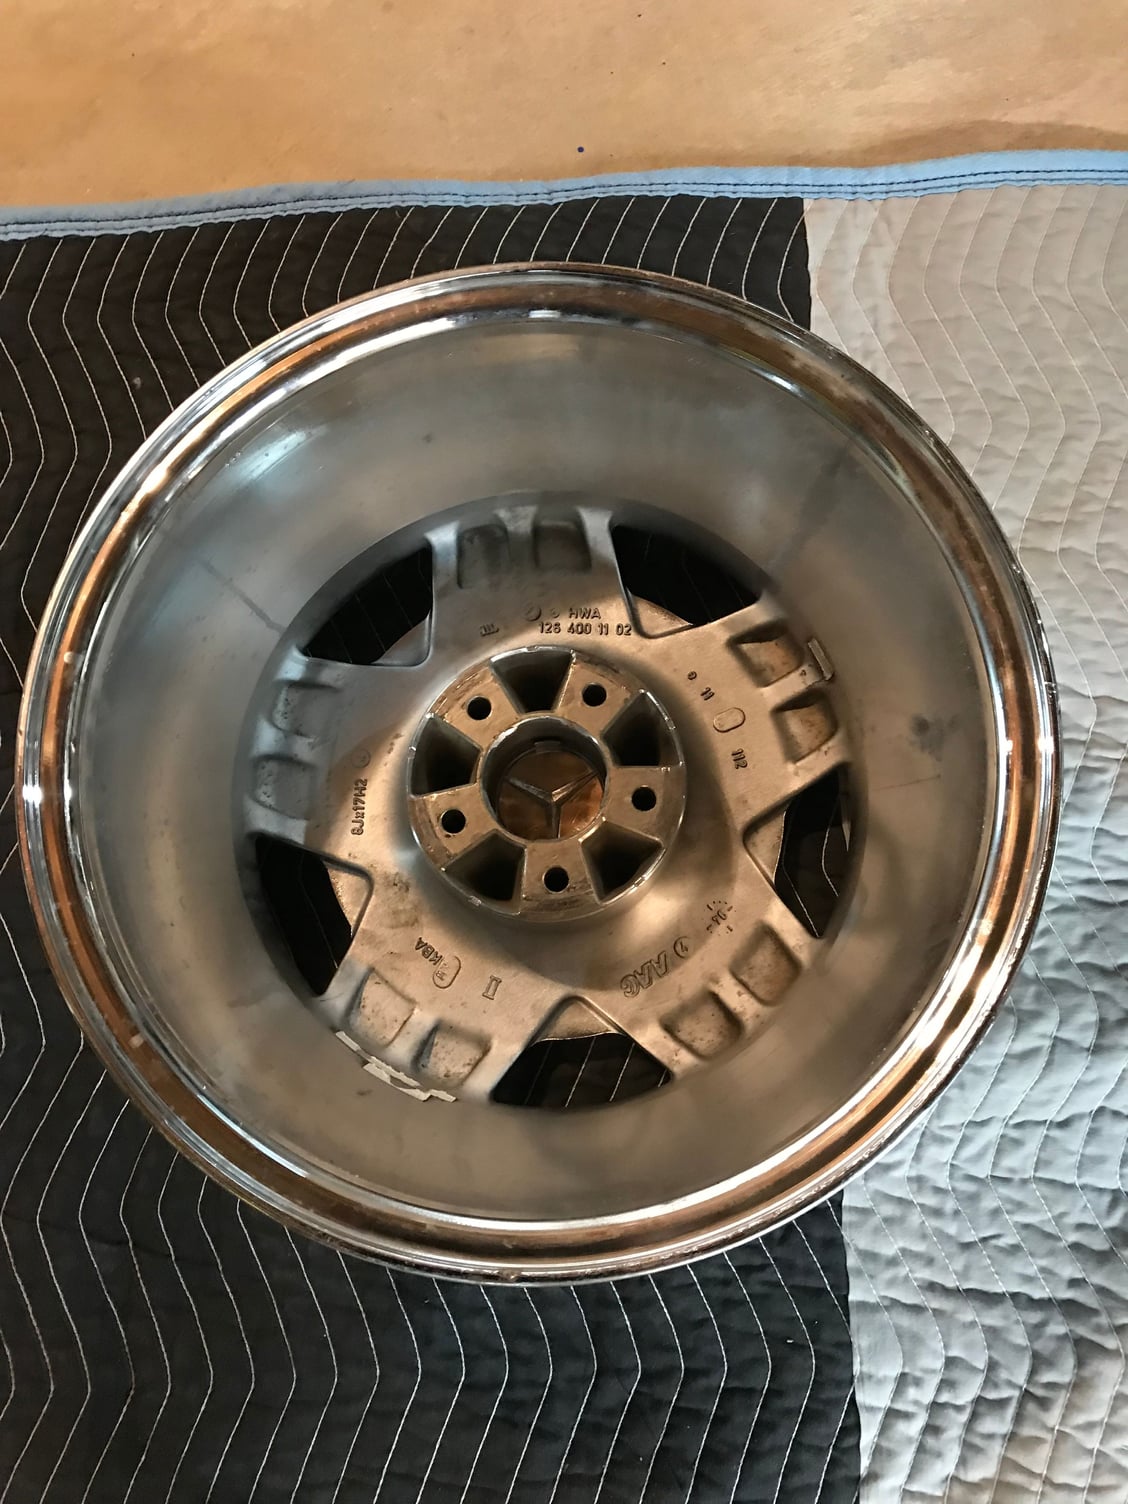 Wheels and Tires/Axles - AMG AERO 1 et11 trade for et 42 - Used - 1986 to 2019 Mercedes-Benz All Models - Chicago, IL 60527, United States